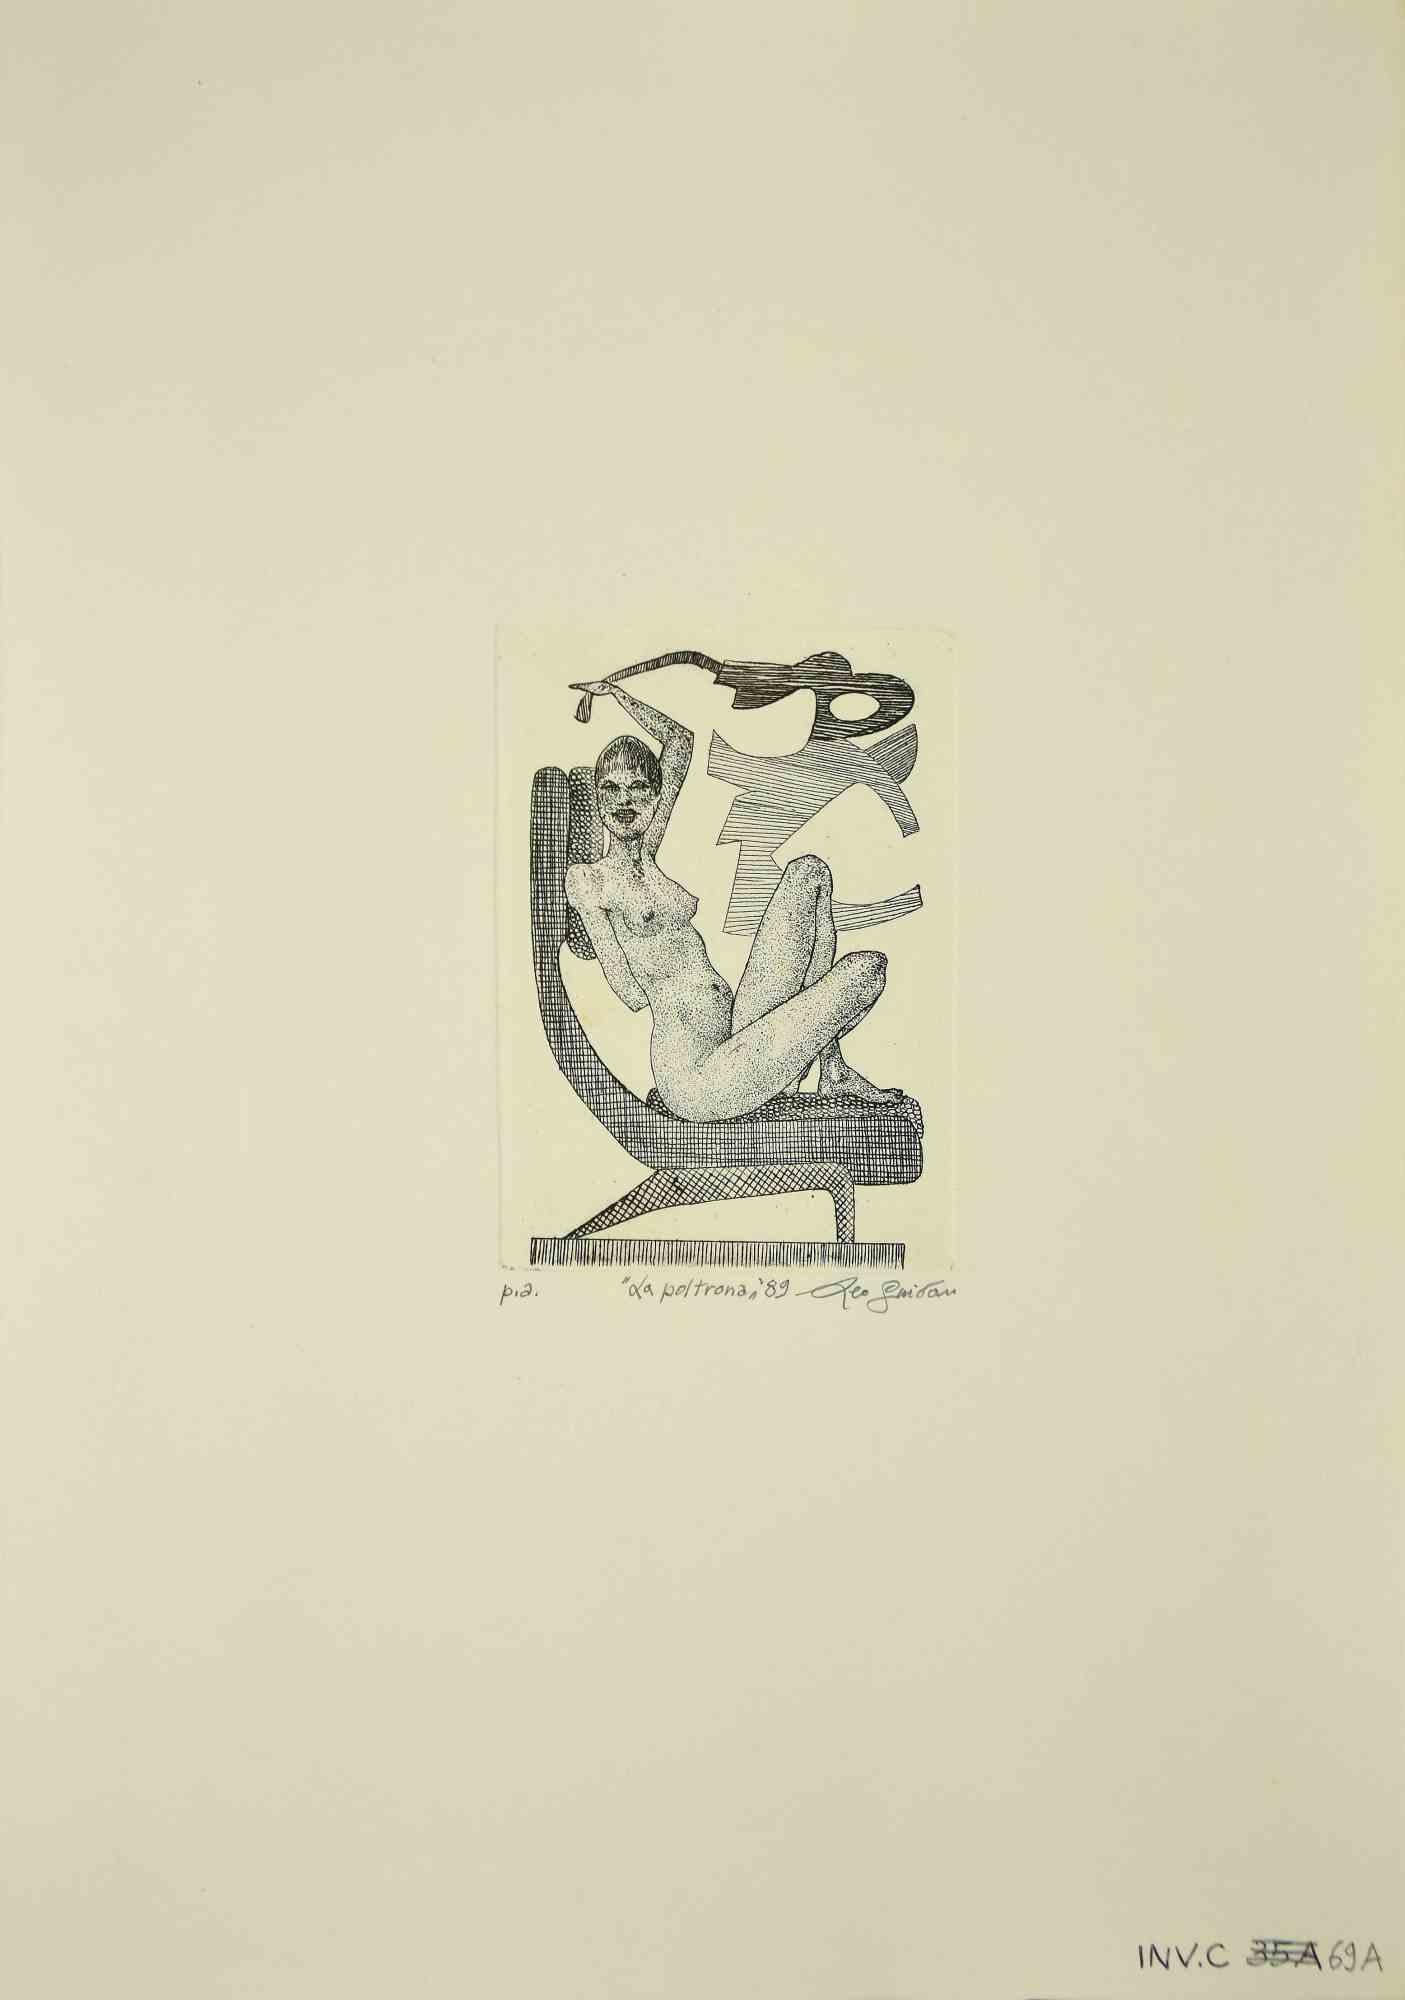 The Armchair is an original artwork realized in 1989  by the Italian Contemporary artist  Leo Guida  (1992 - 2017).

Original etching on ivory-colored paper.

Hand-signed on the lower right in pencil.

Artist's proof, titled on the lower